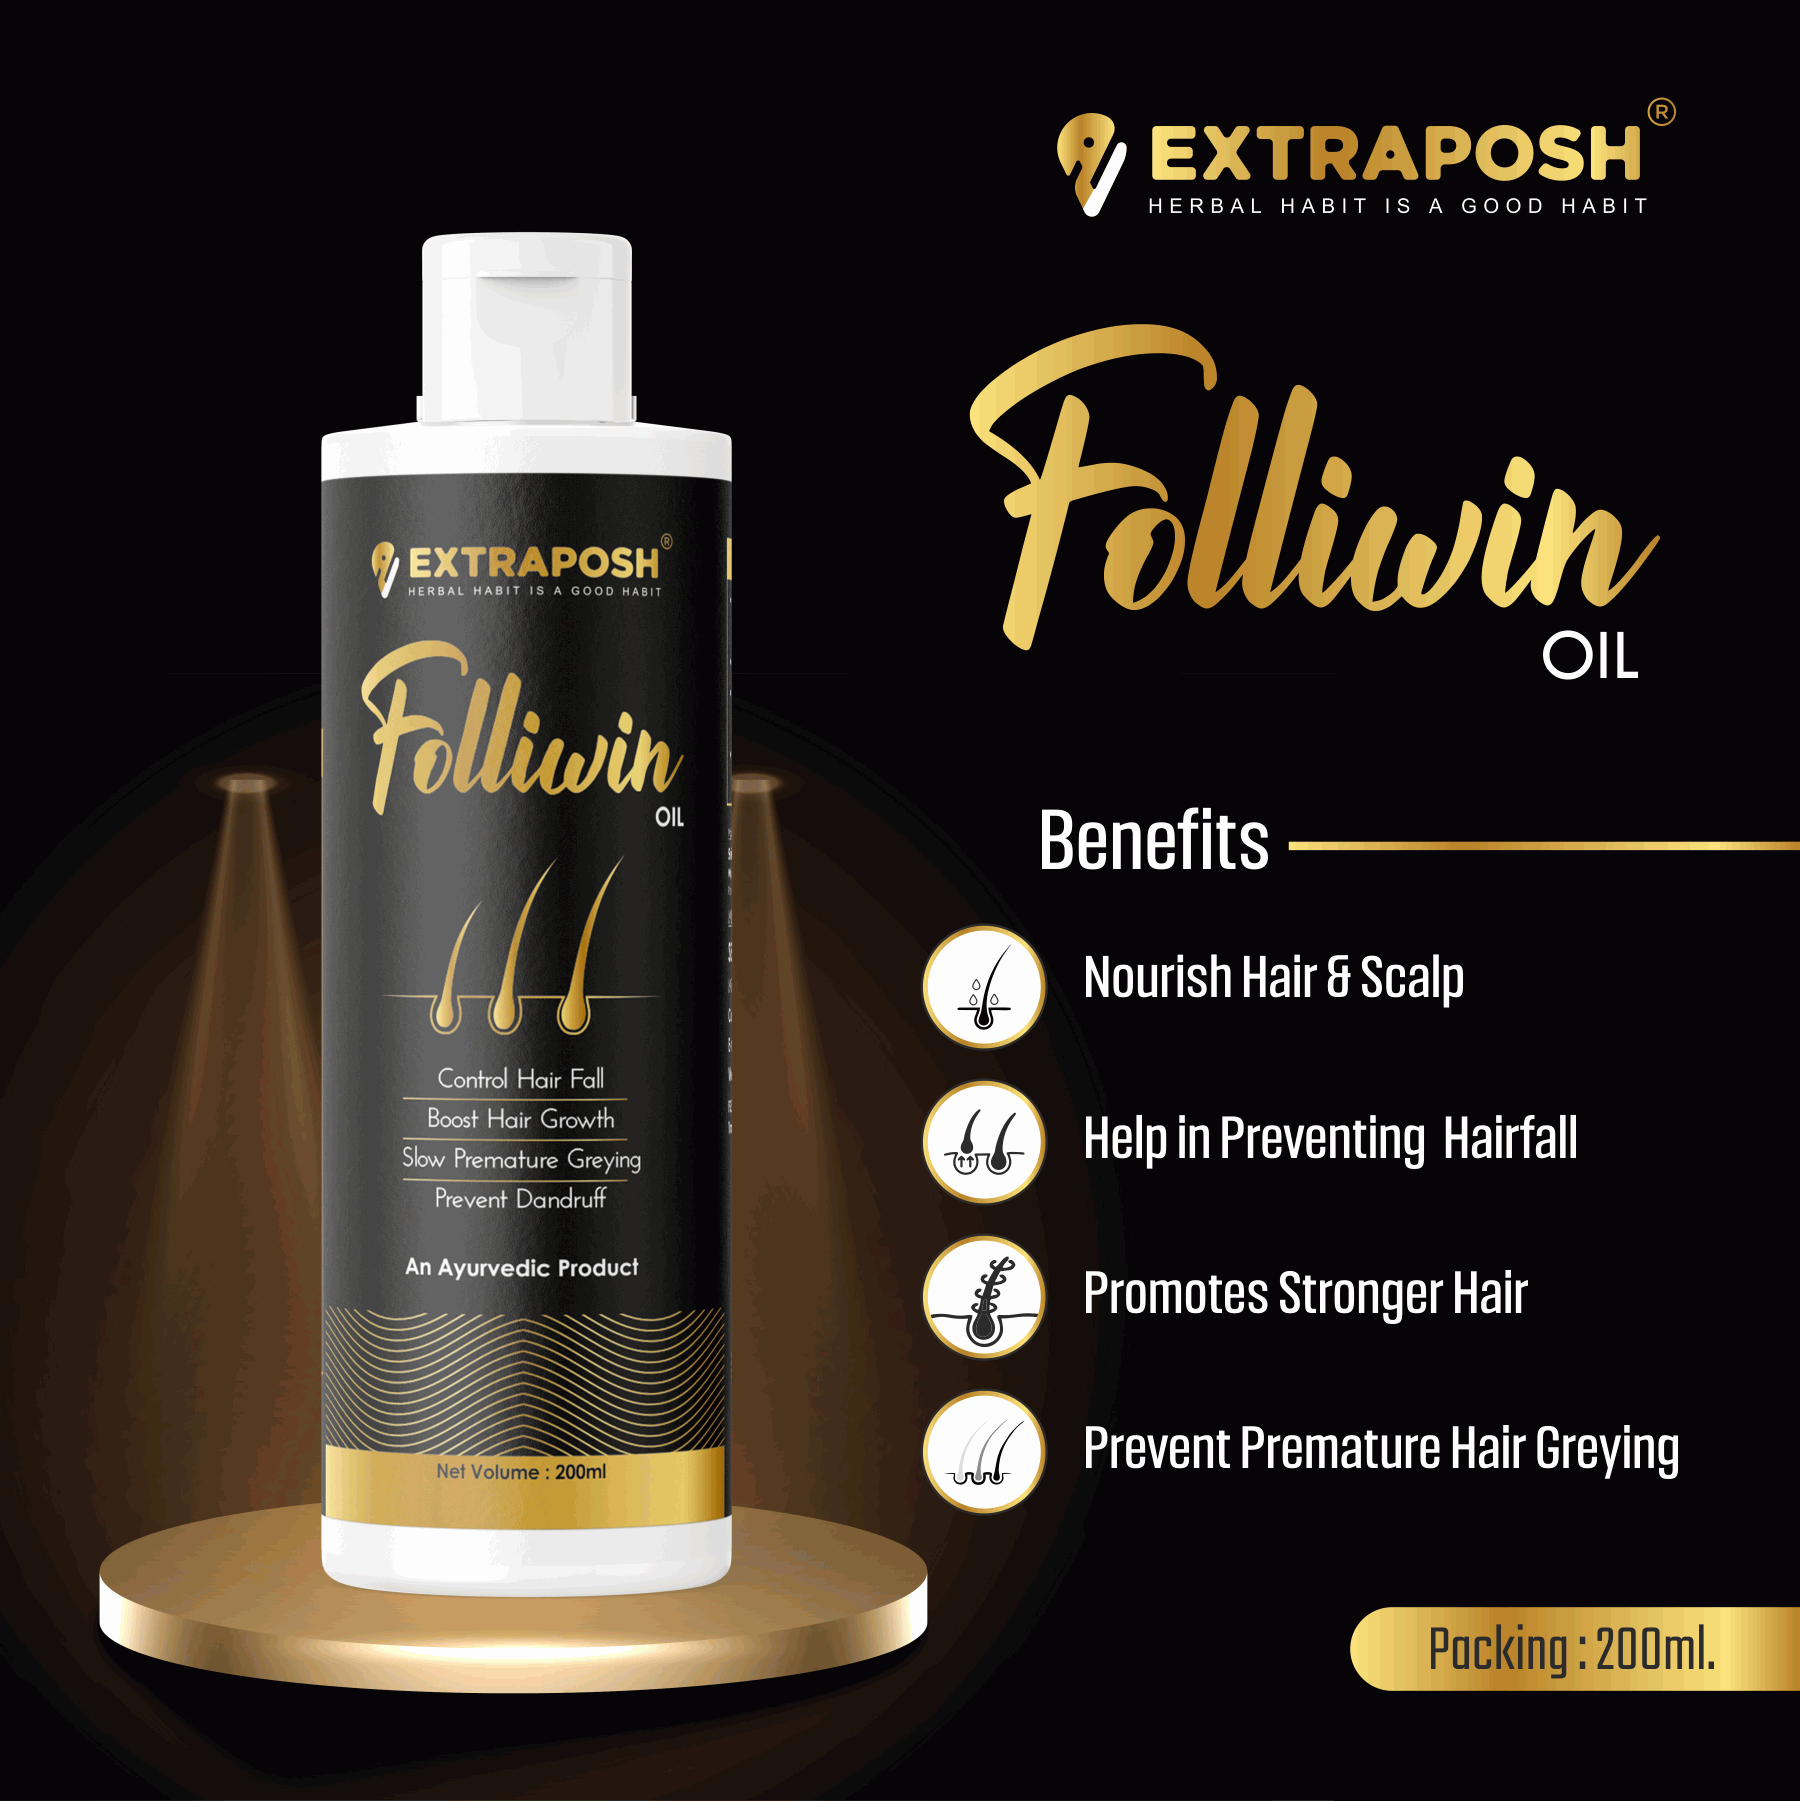 Folliwin Hair oil provides benefits like Nourish Hair & Scalp Help in Preventing Hair Fall Promotes stronger hair Prevent Premature Hair Greying